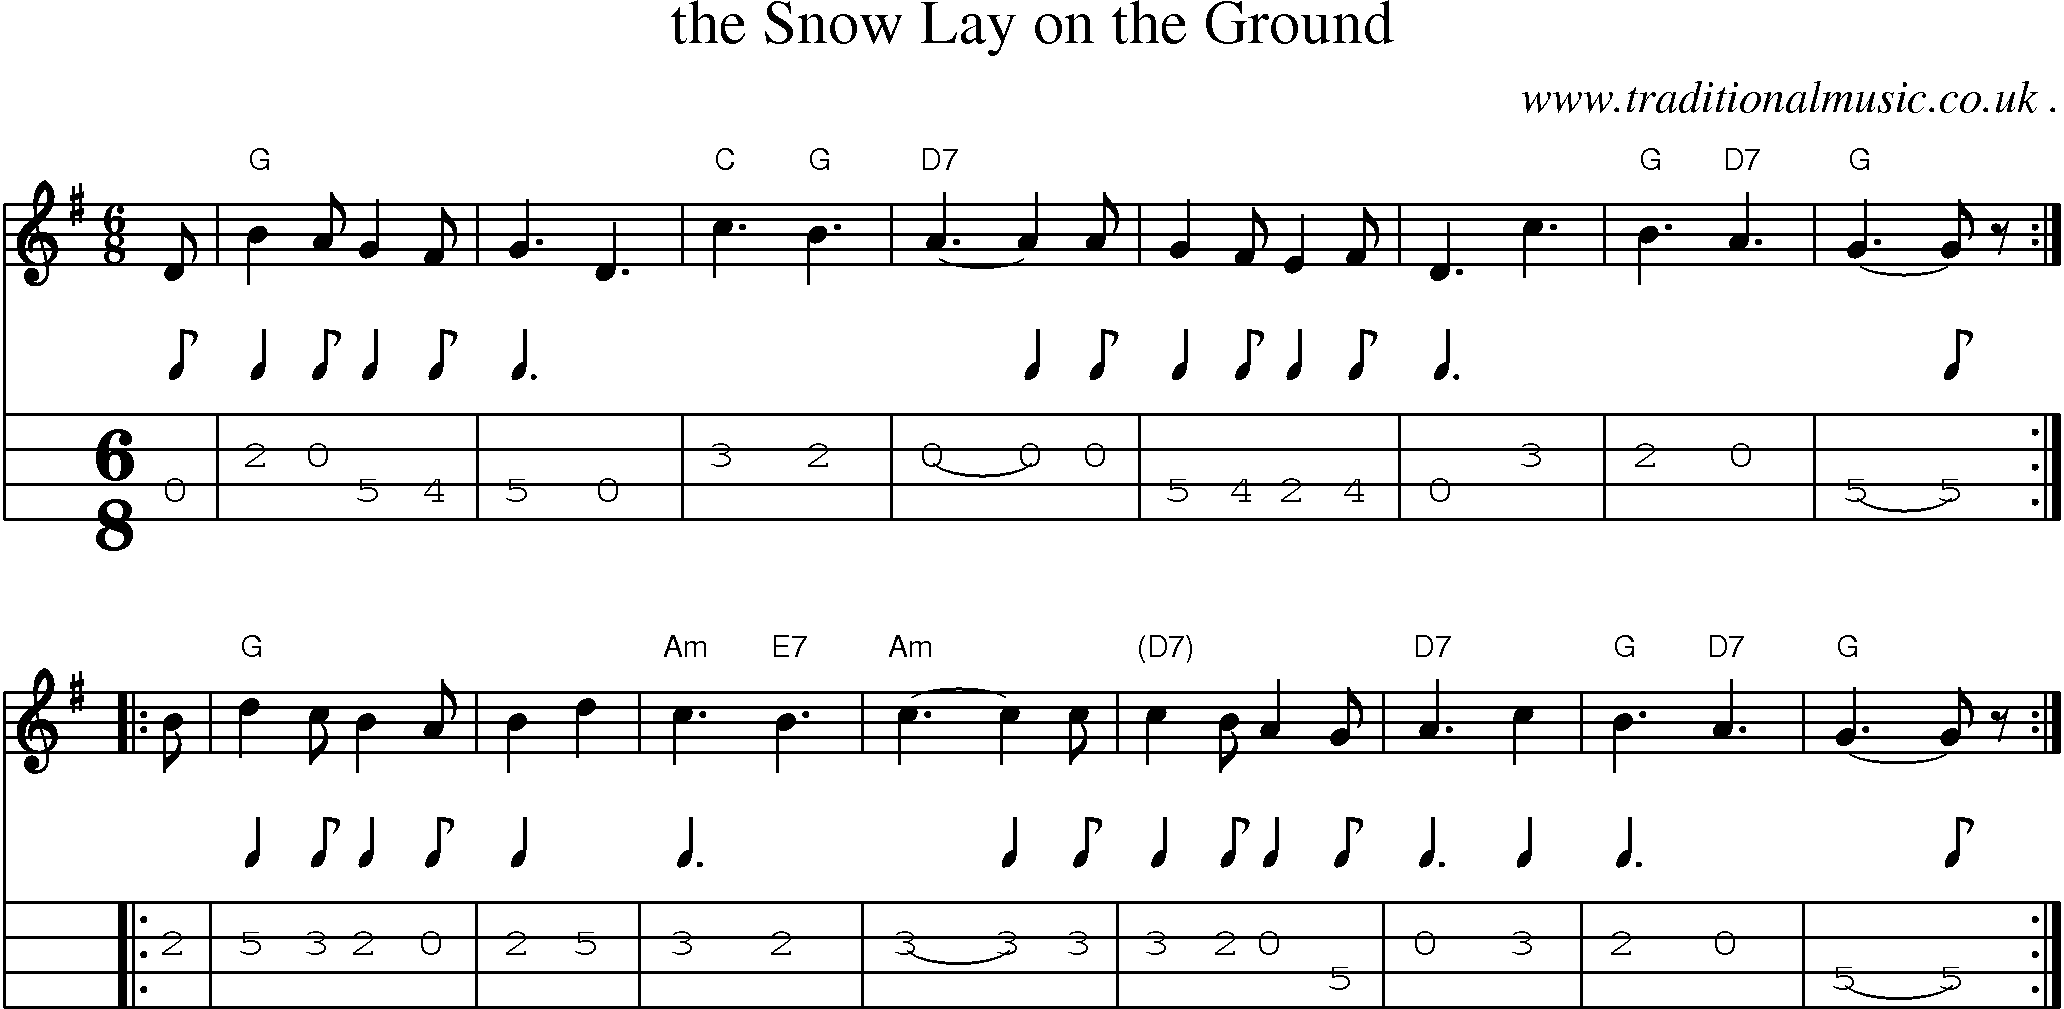 Sheet-music  score, Chords and Mandolin Tabs for The Snow Lay On The Ground